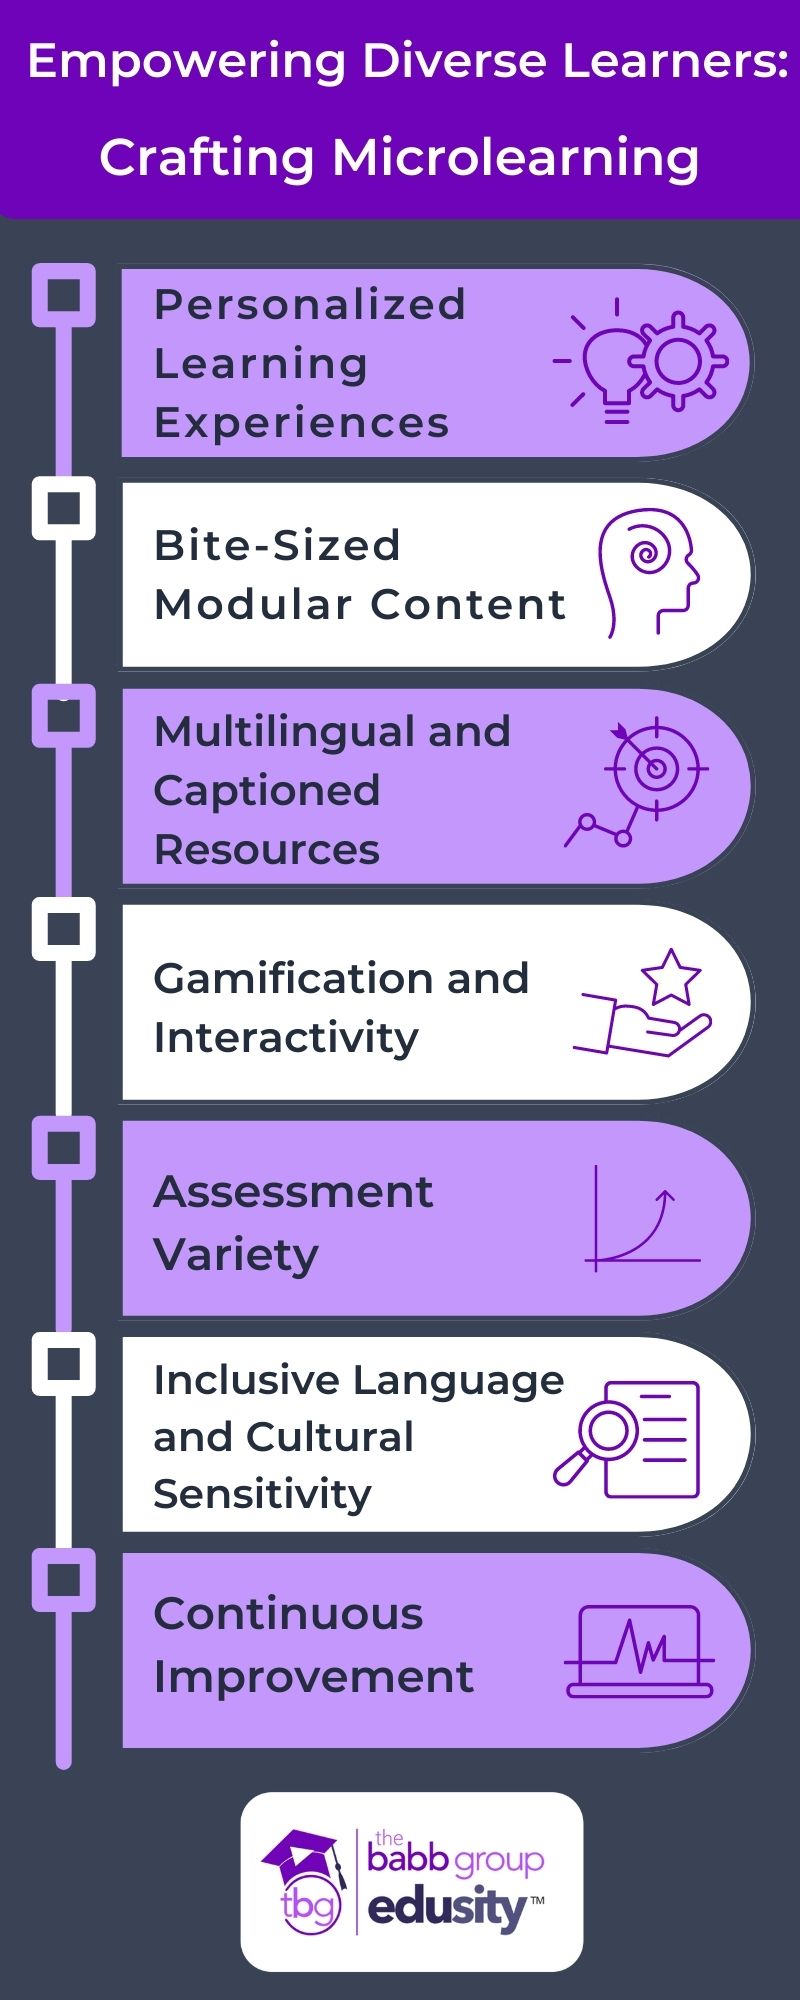 An image of an infographic with text. The title is: Empowering diverse learners: Crafting Microlearning. The points include: personalized learning experiences, bite-sized modular content, multilingual and captioned resources, gamification and interactivity, assessment variety, inclusive language and cultural sensitivity, continuous improvement. 